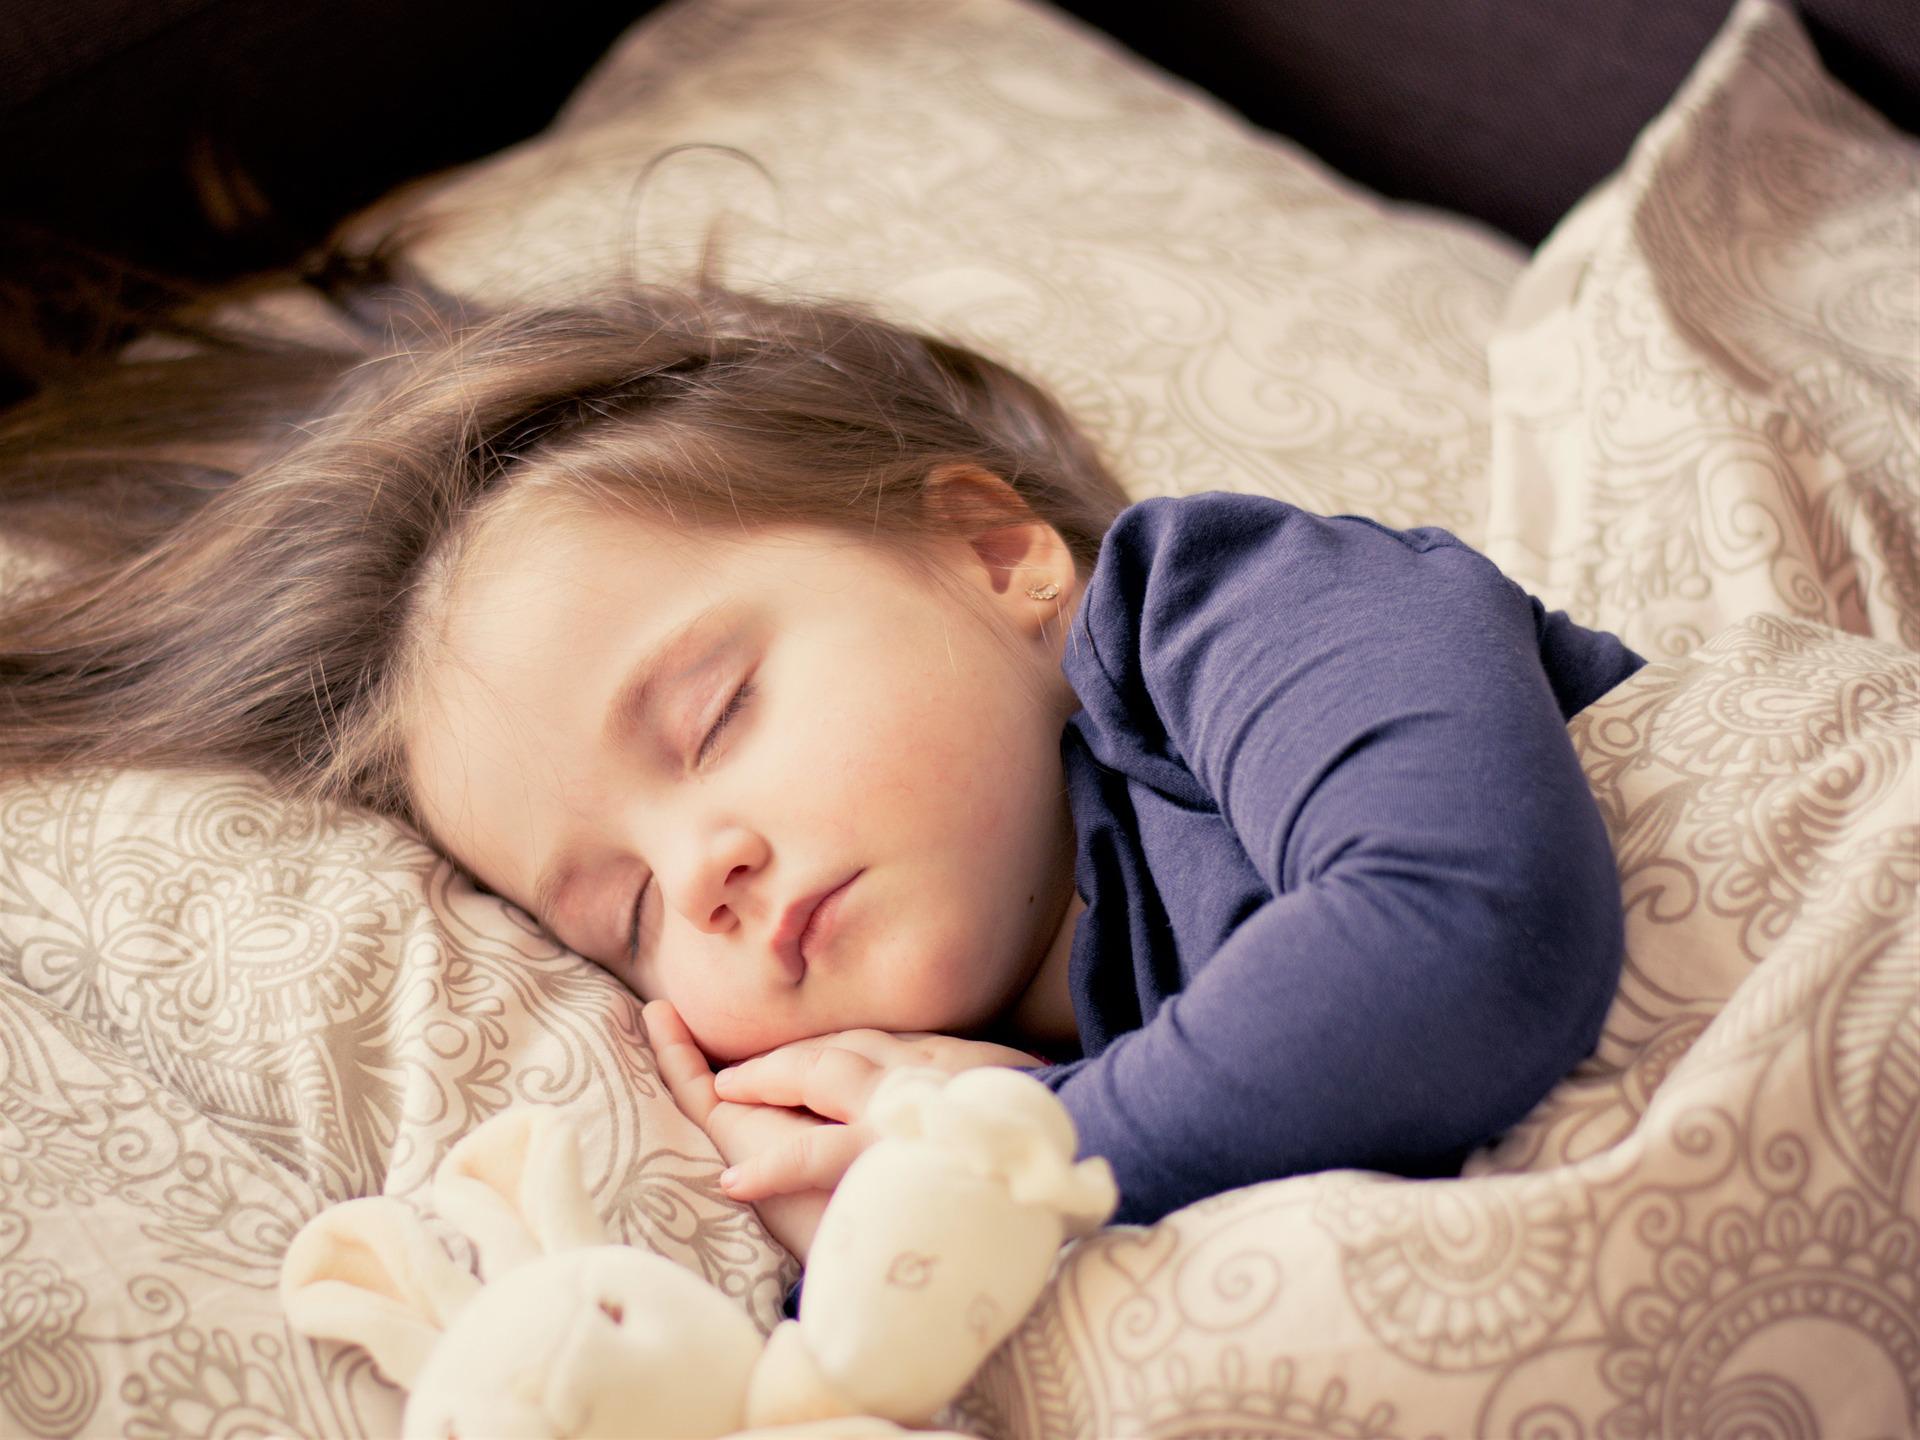 Child sleeping peacefully in bed with bunny